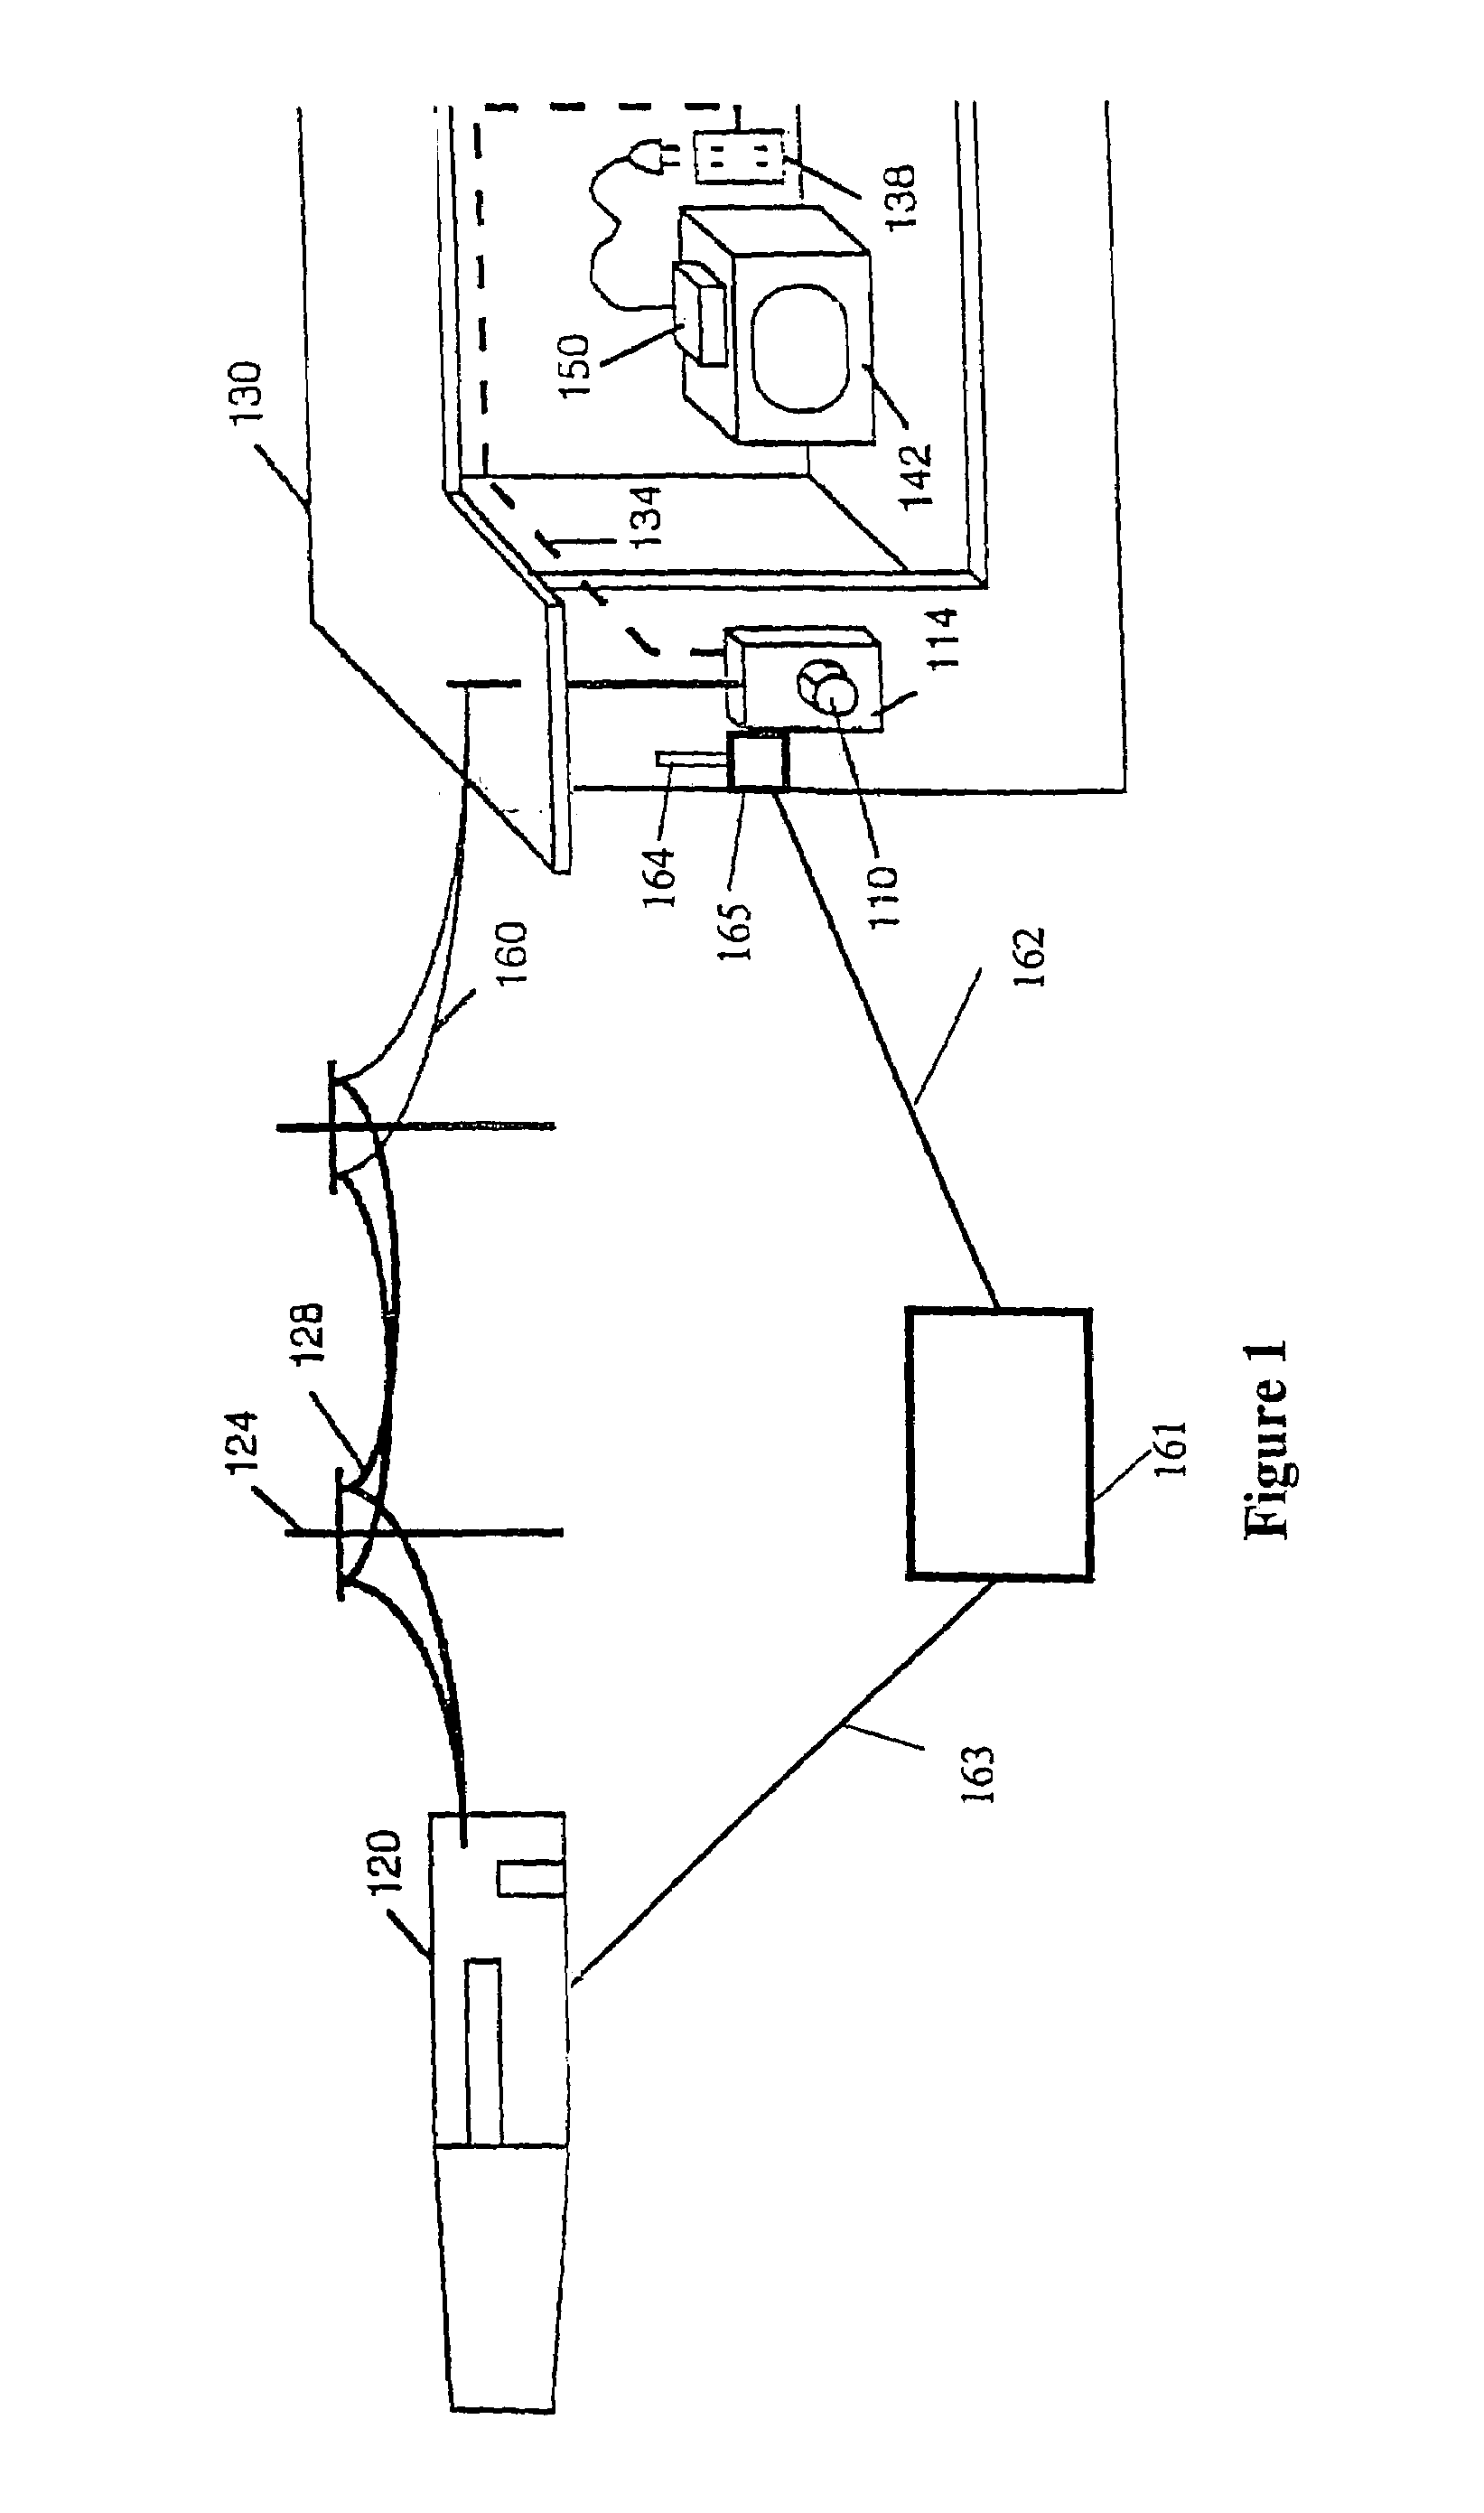 Multifunction data port providing an interface between a digital network and electronics in residential or commercial structures